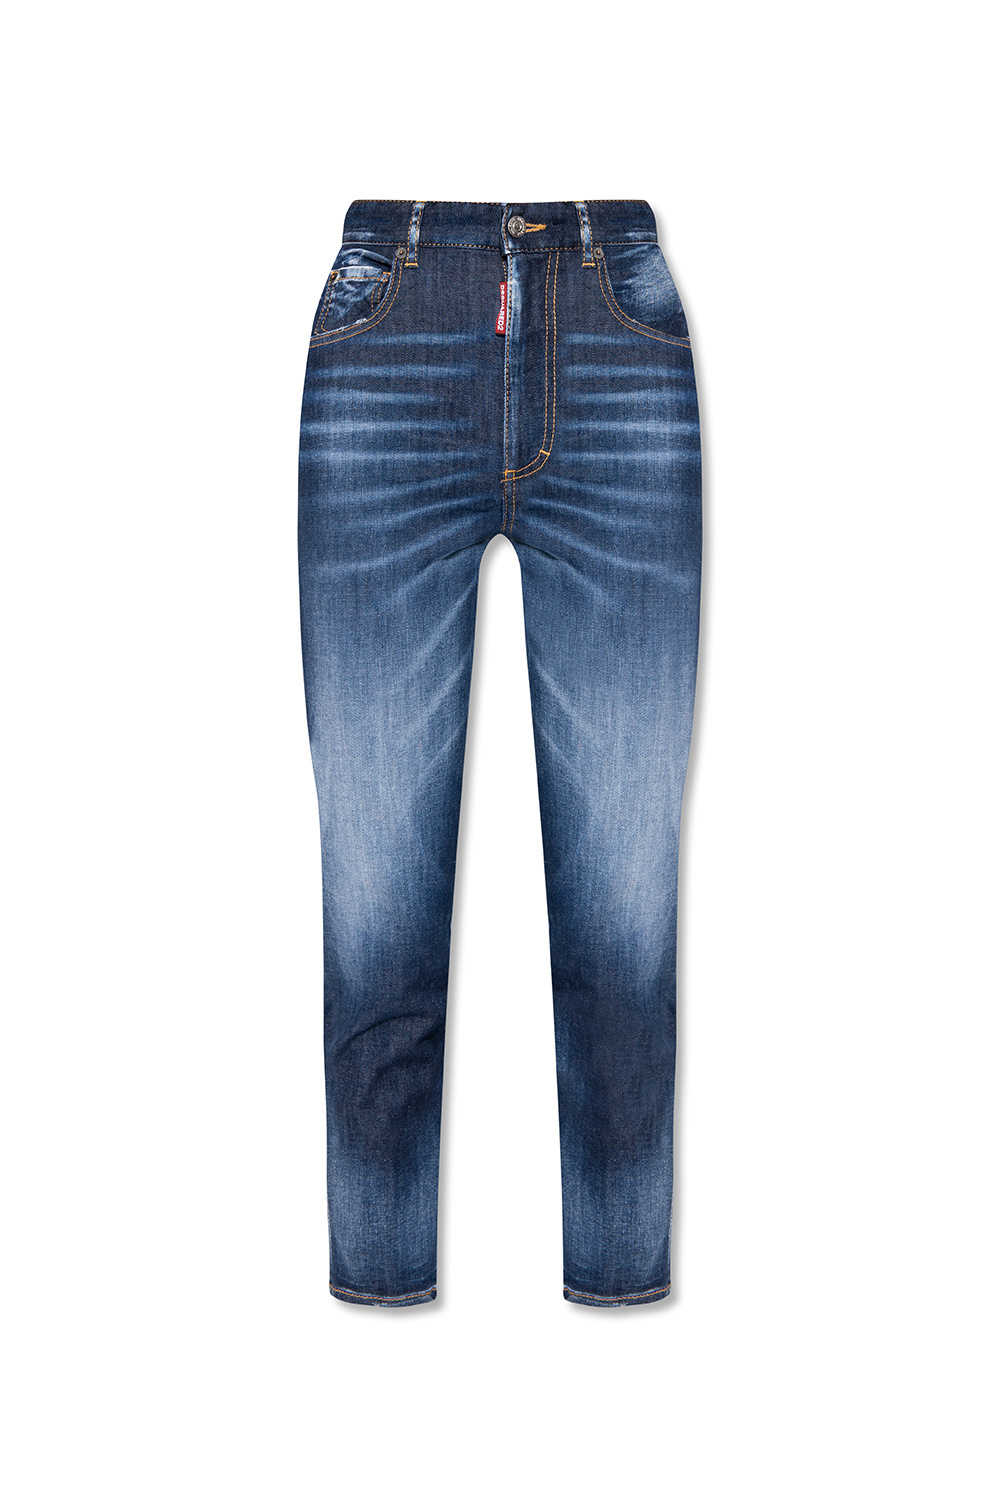 Dsquared2 'Cropped Twiggy' jeans | Women's Clothing | Vitkac